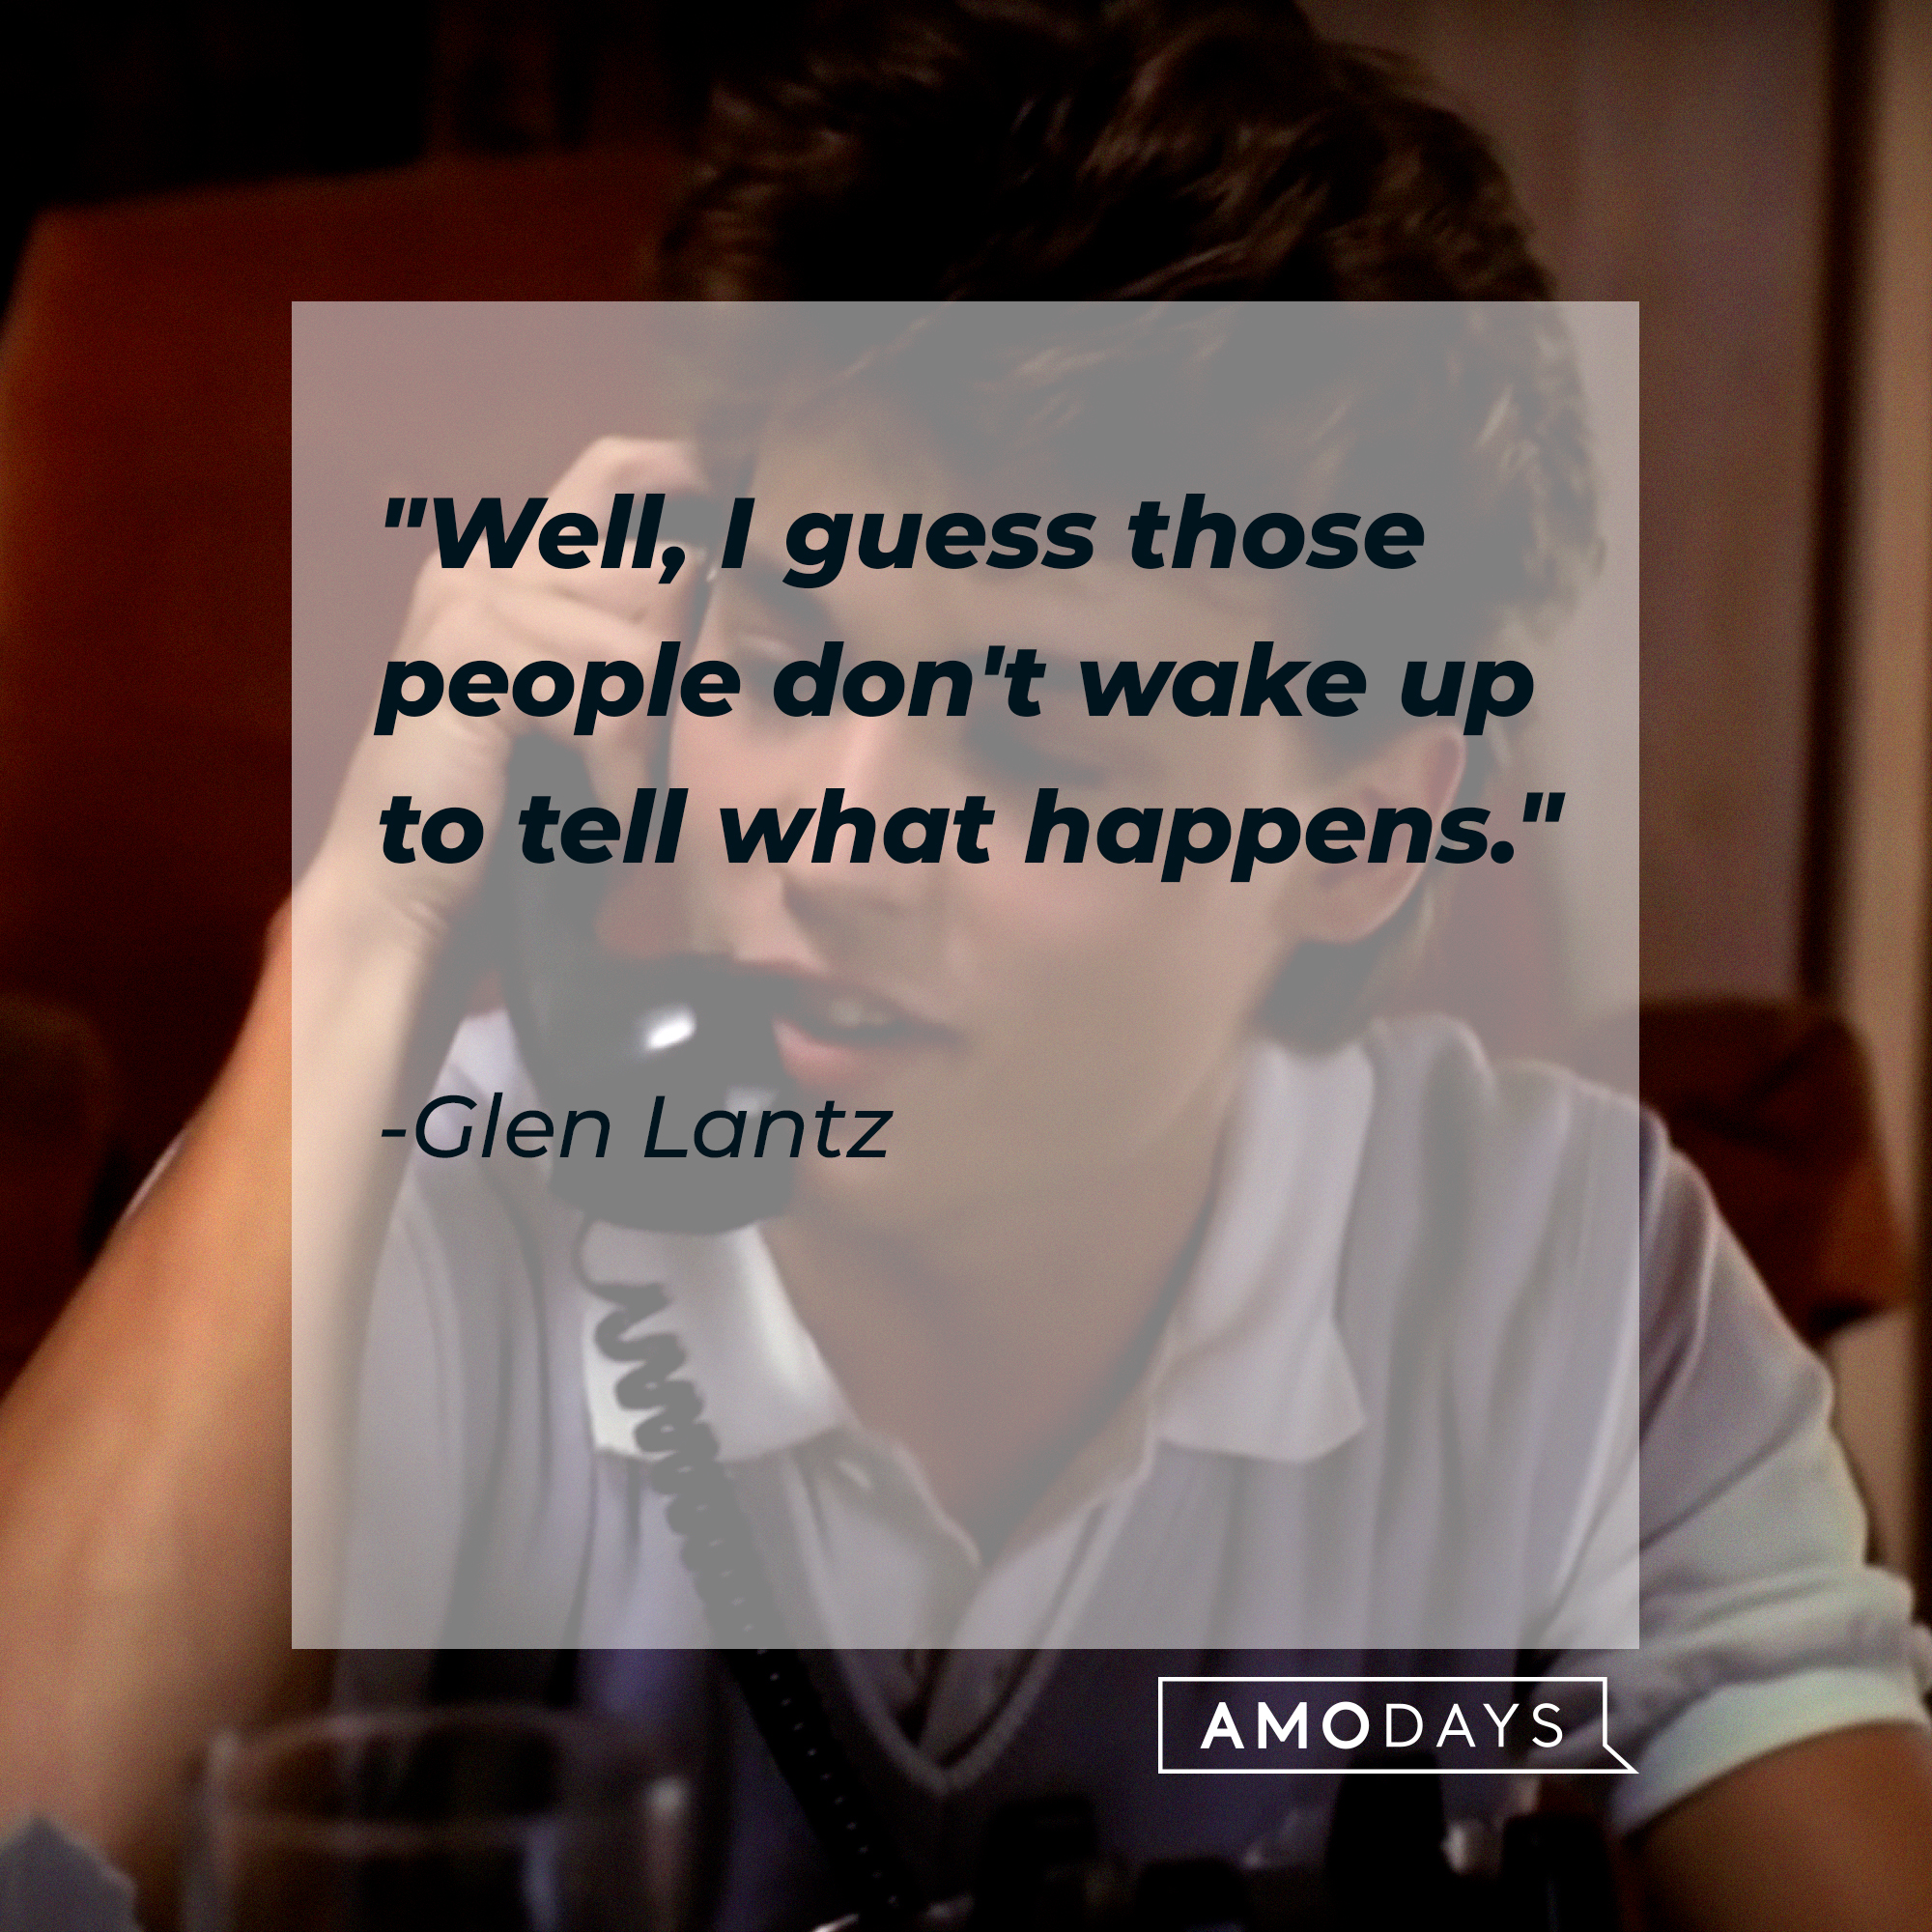 Glen Lantz's quote: "Well, I guess those people don't wake up to tell what happens." | Source: Facebook/ANightmareonElmStreet